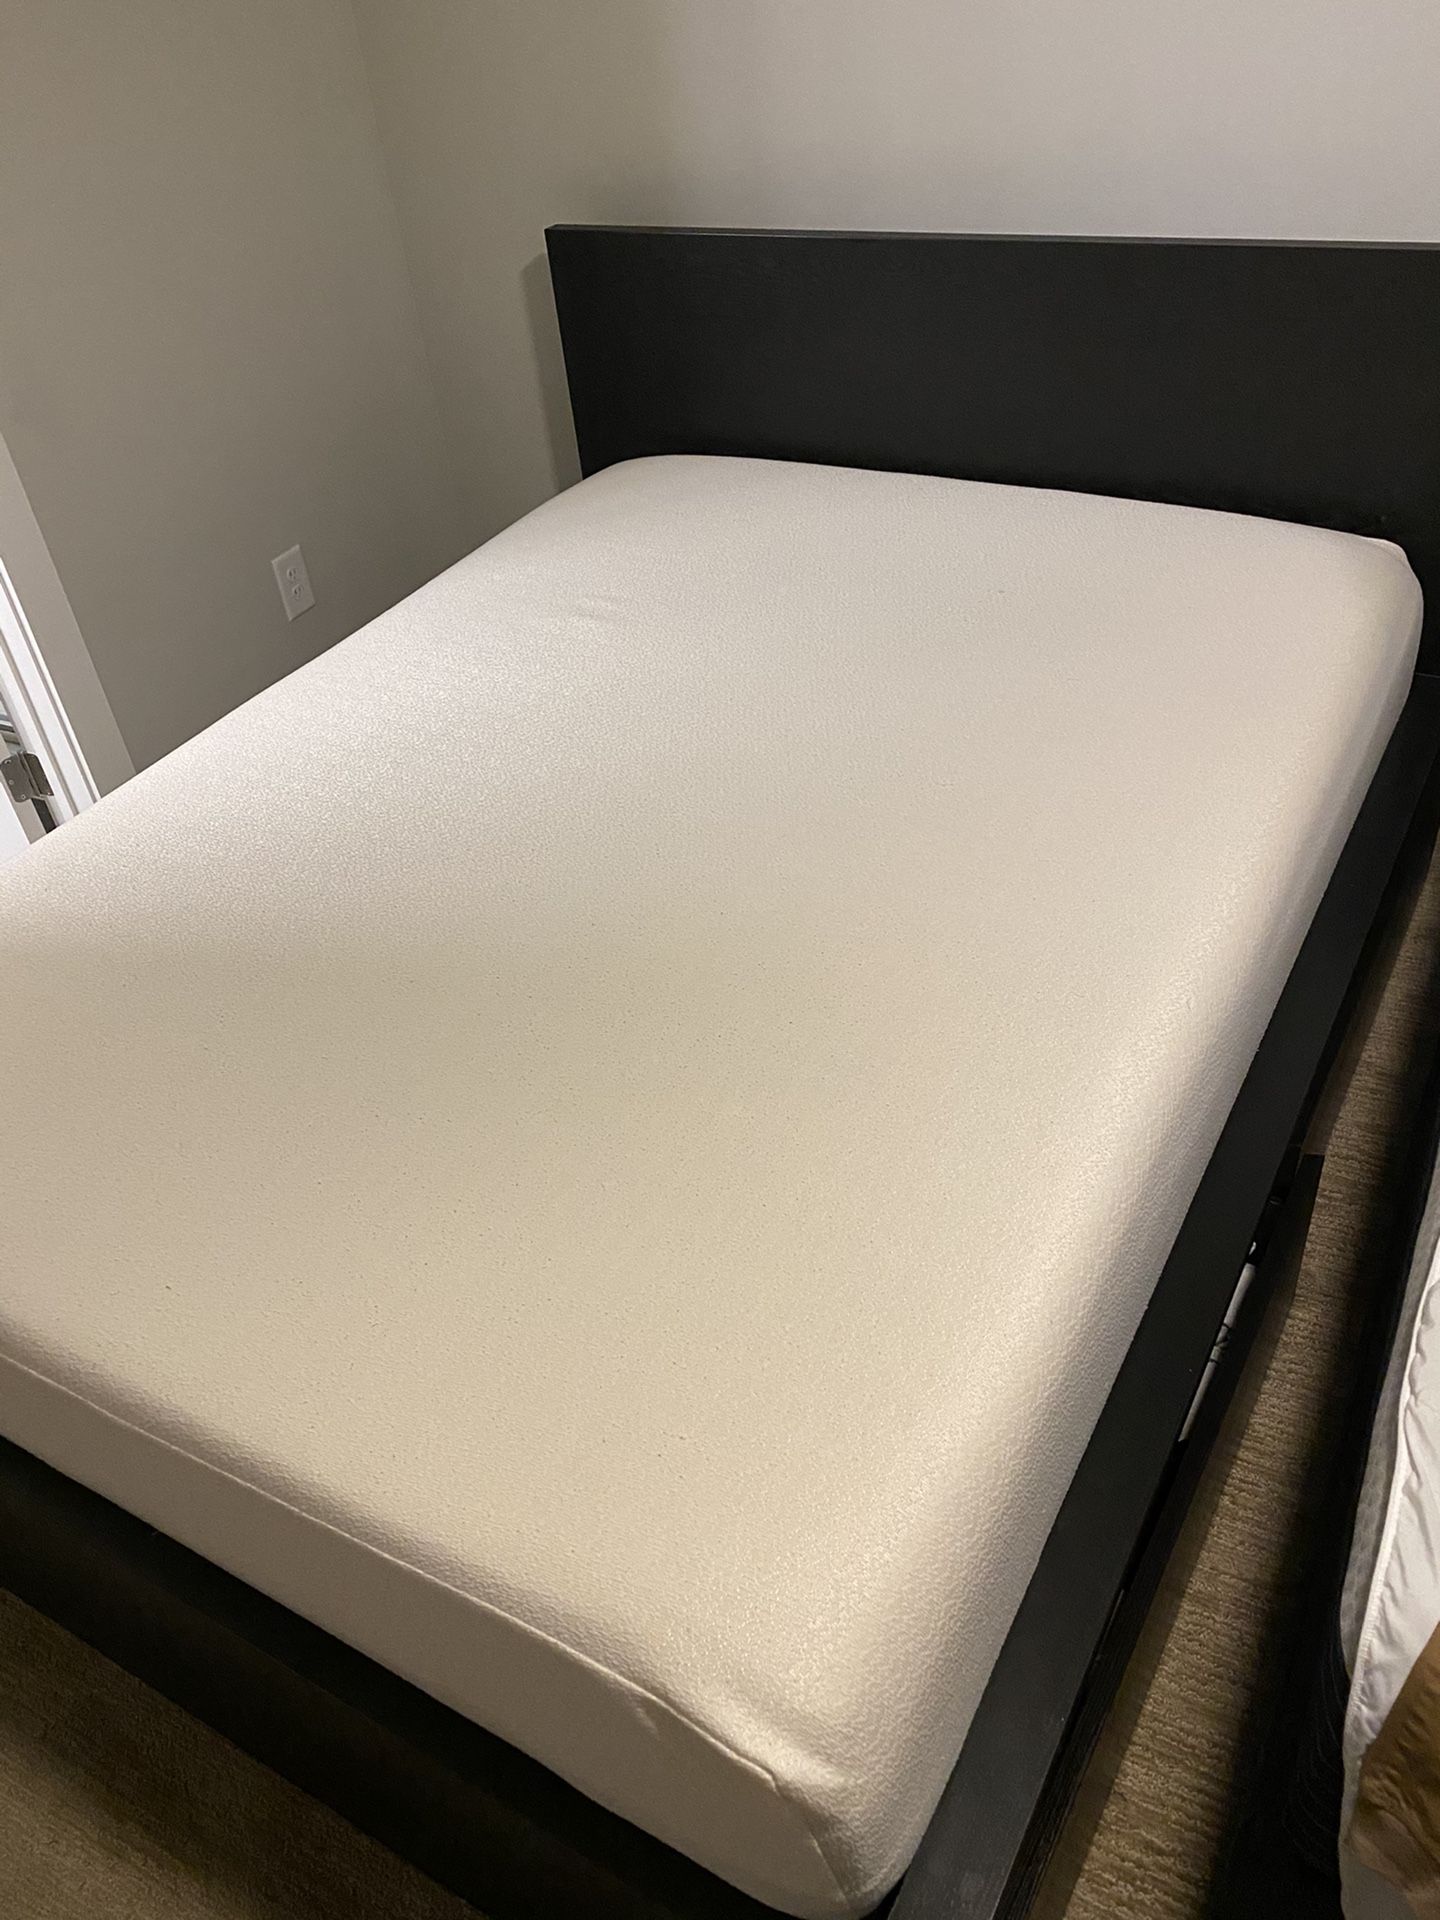 12 inch Queen “Firm” Memory Foam Mattress and bed with storage drawers